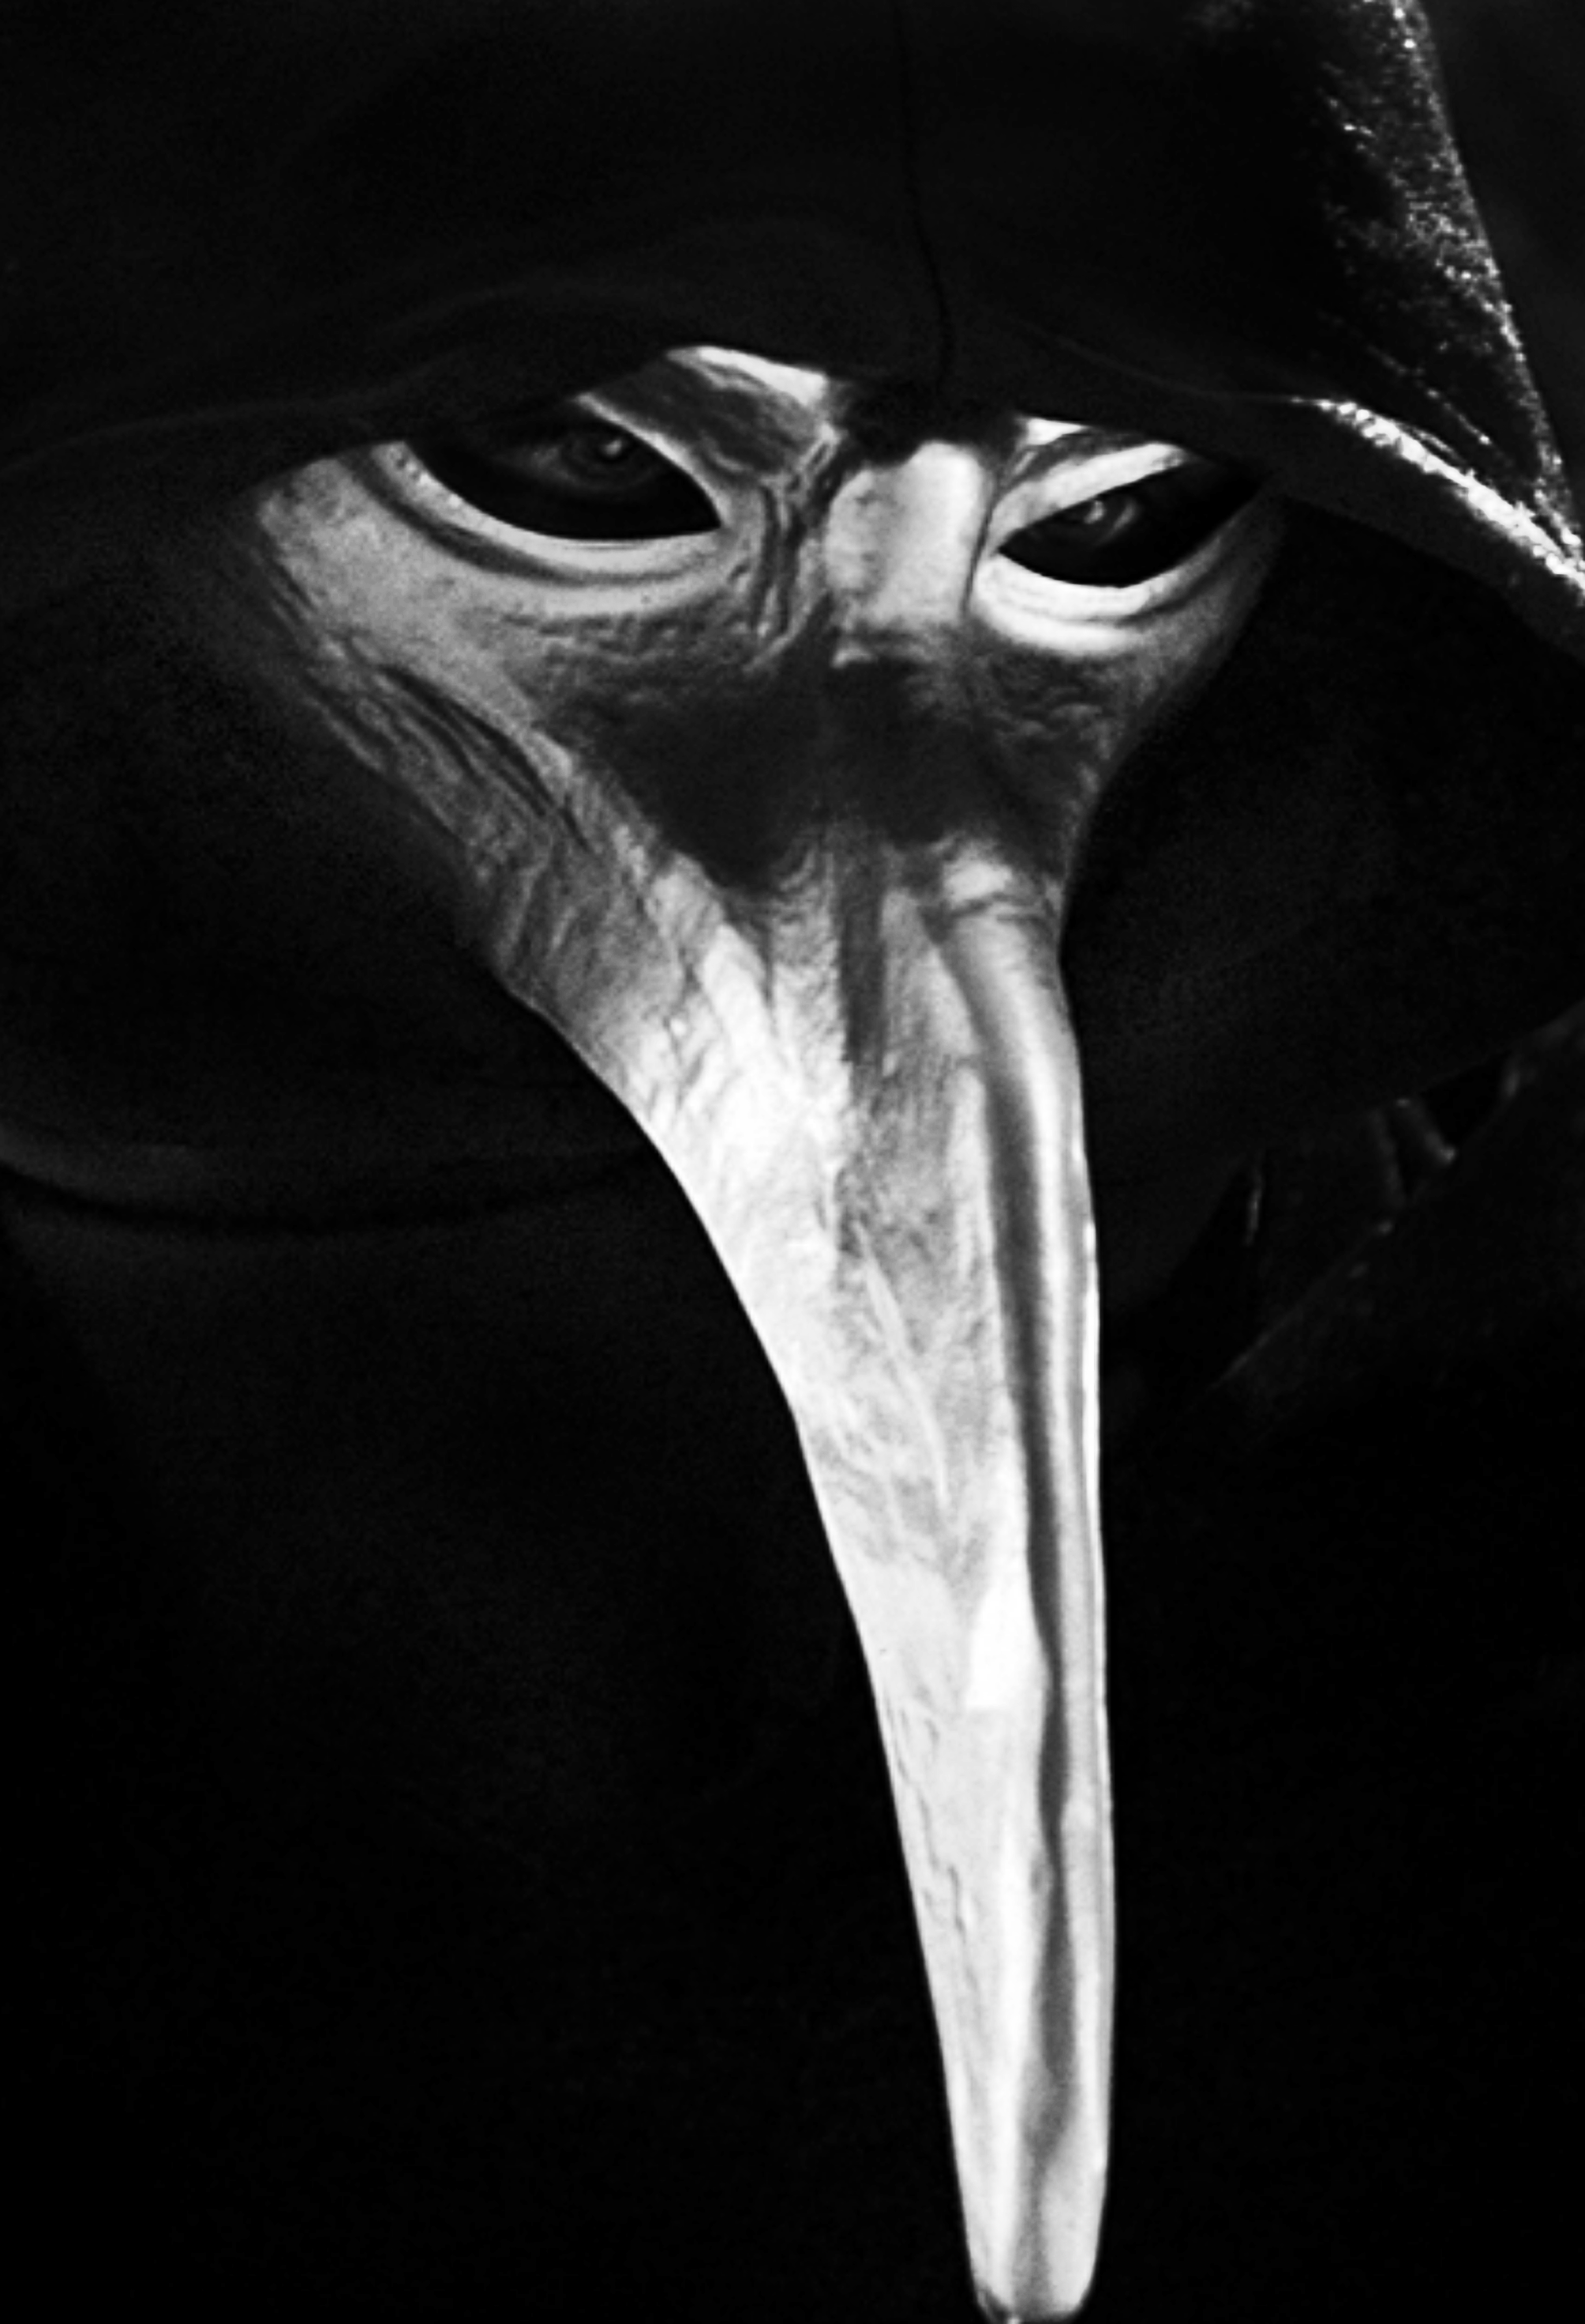 concepts similar to the plague doctor